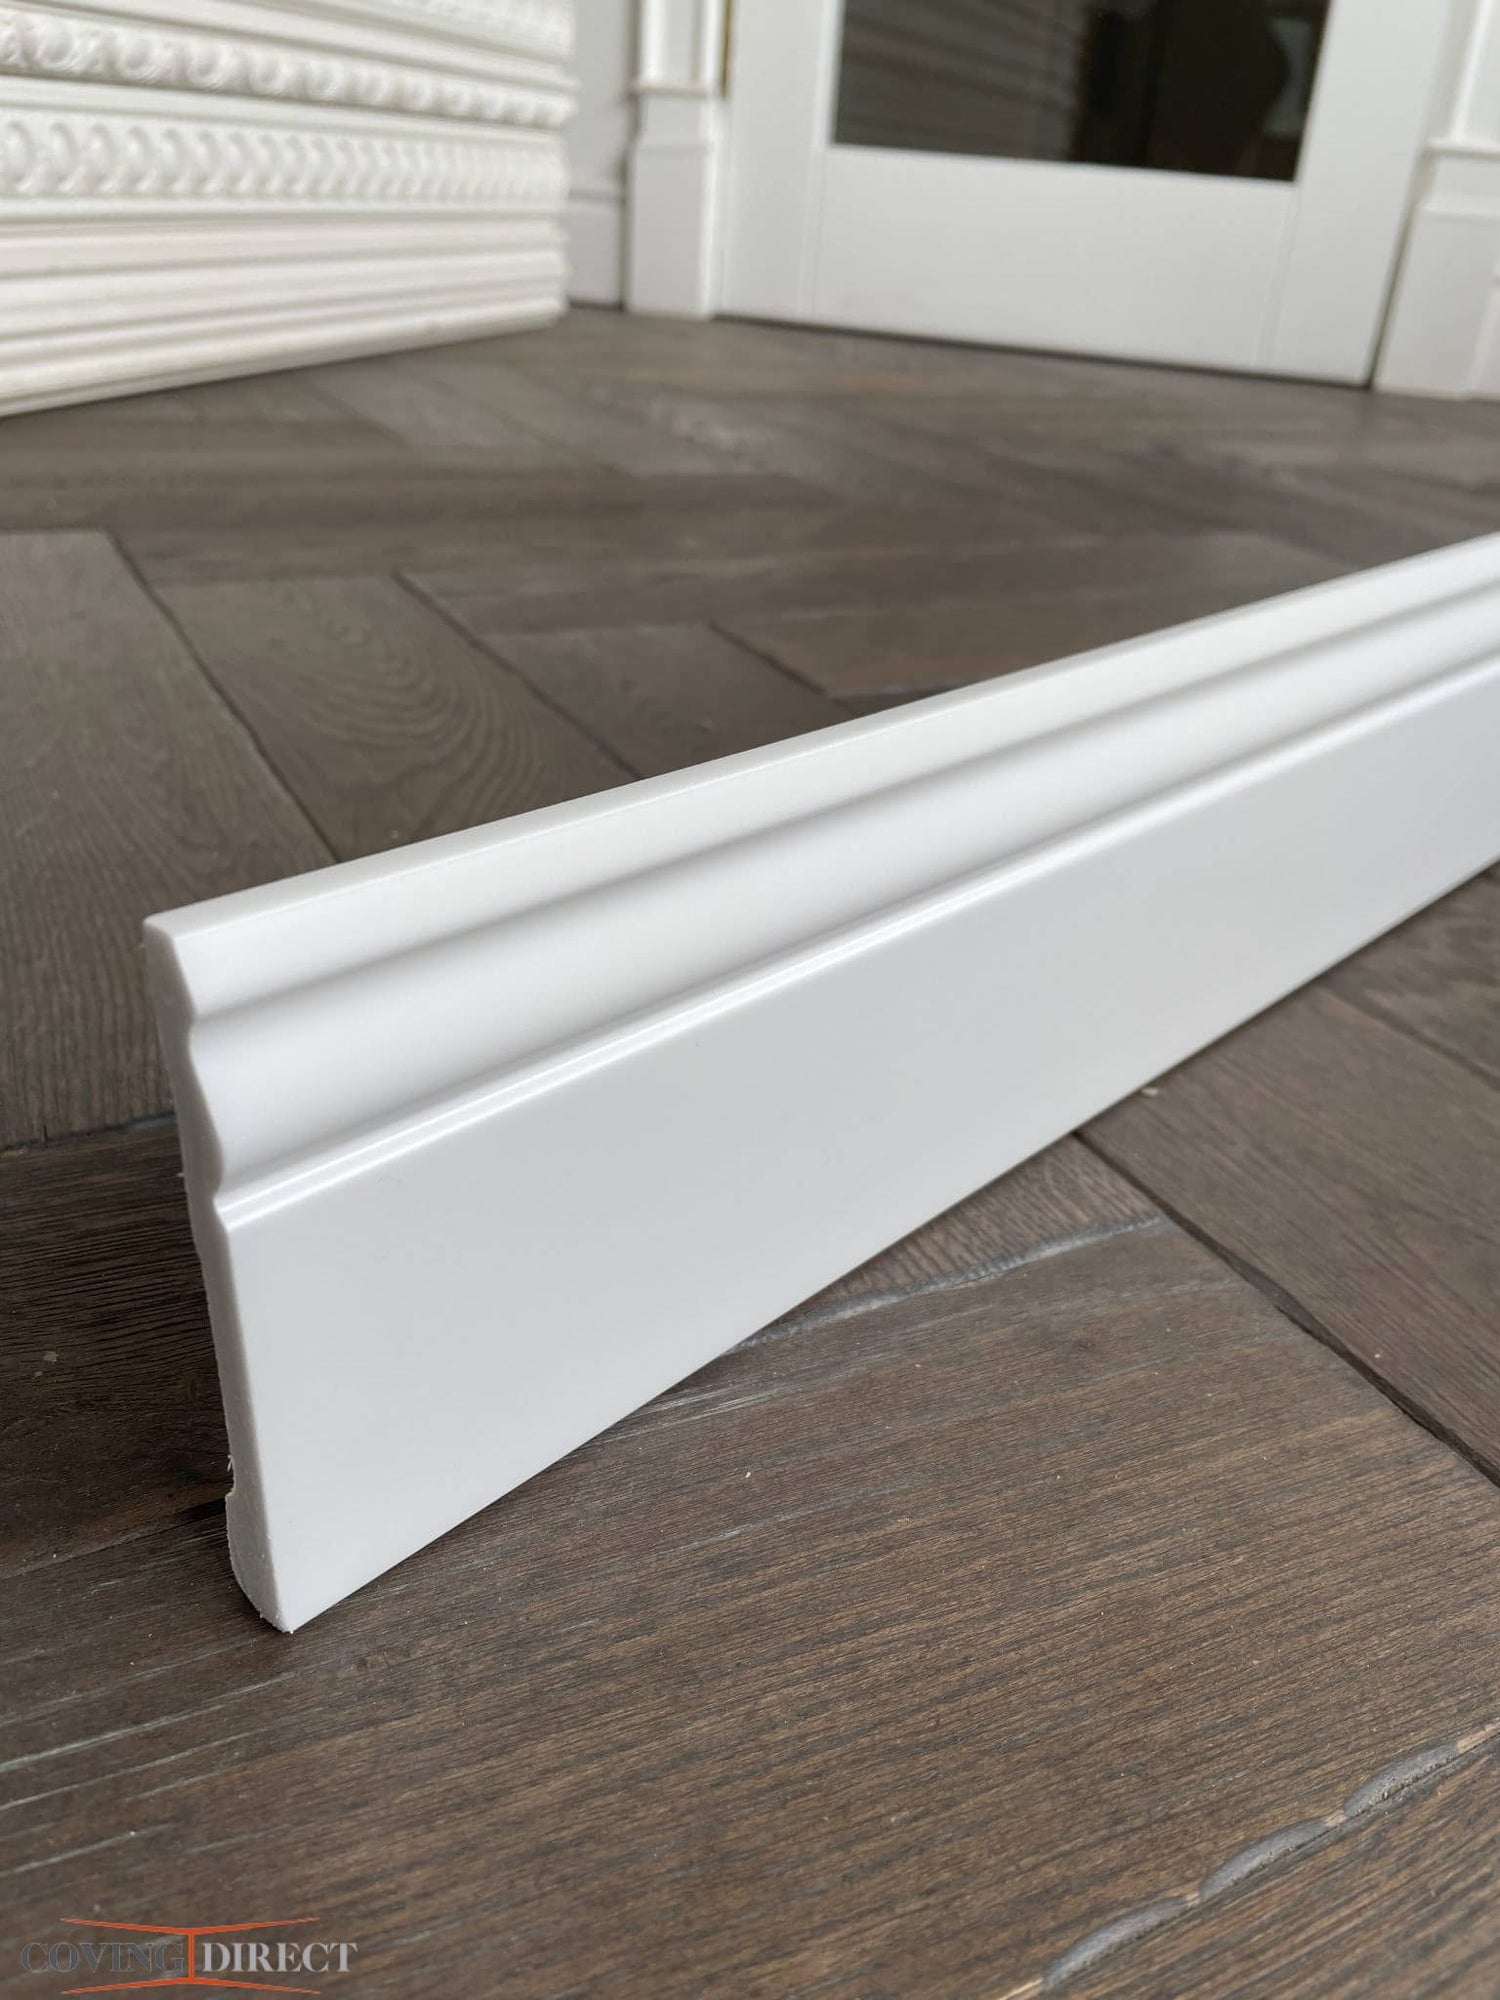 MD094P - Skirting Board on a floor